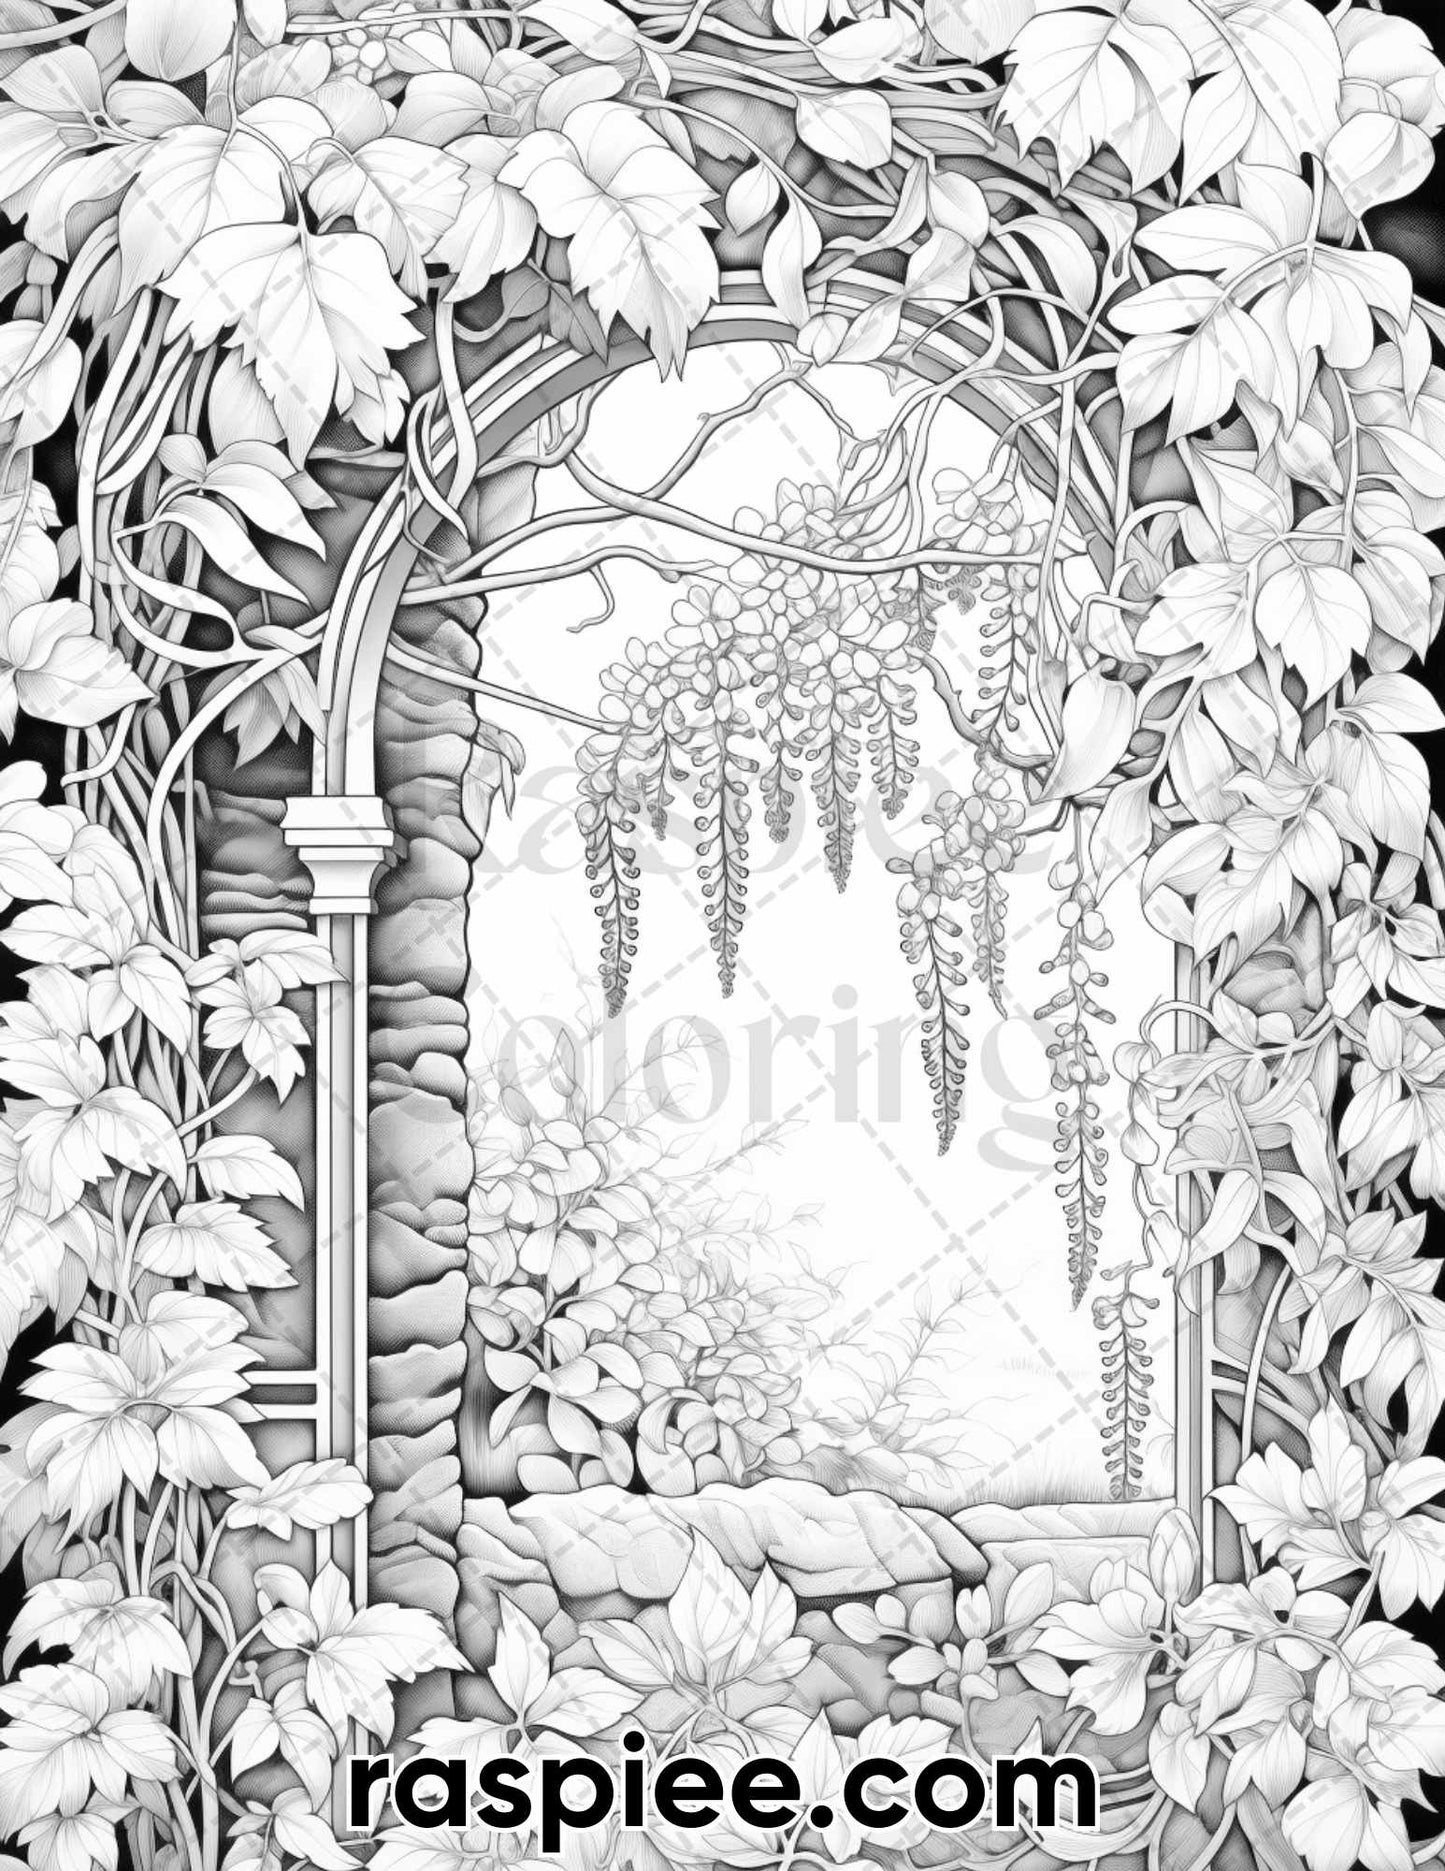 adult coloring pages, adult coloring sheets, adult coloring book pdf, adult coloring book printable, grayscale coloring pages, grayscale coloring books, spring coloring pages for adults, spring coloring book pdf, flower coloring pages for adults, flower coloring book pdf, art nouveau flowers coloring pages